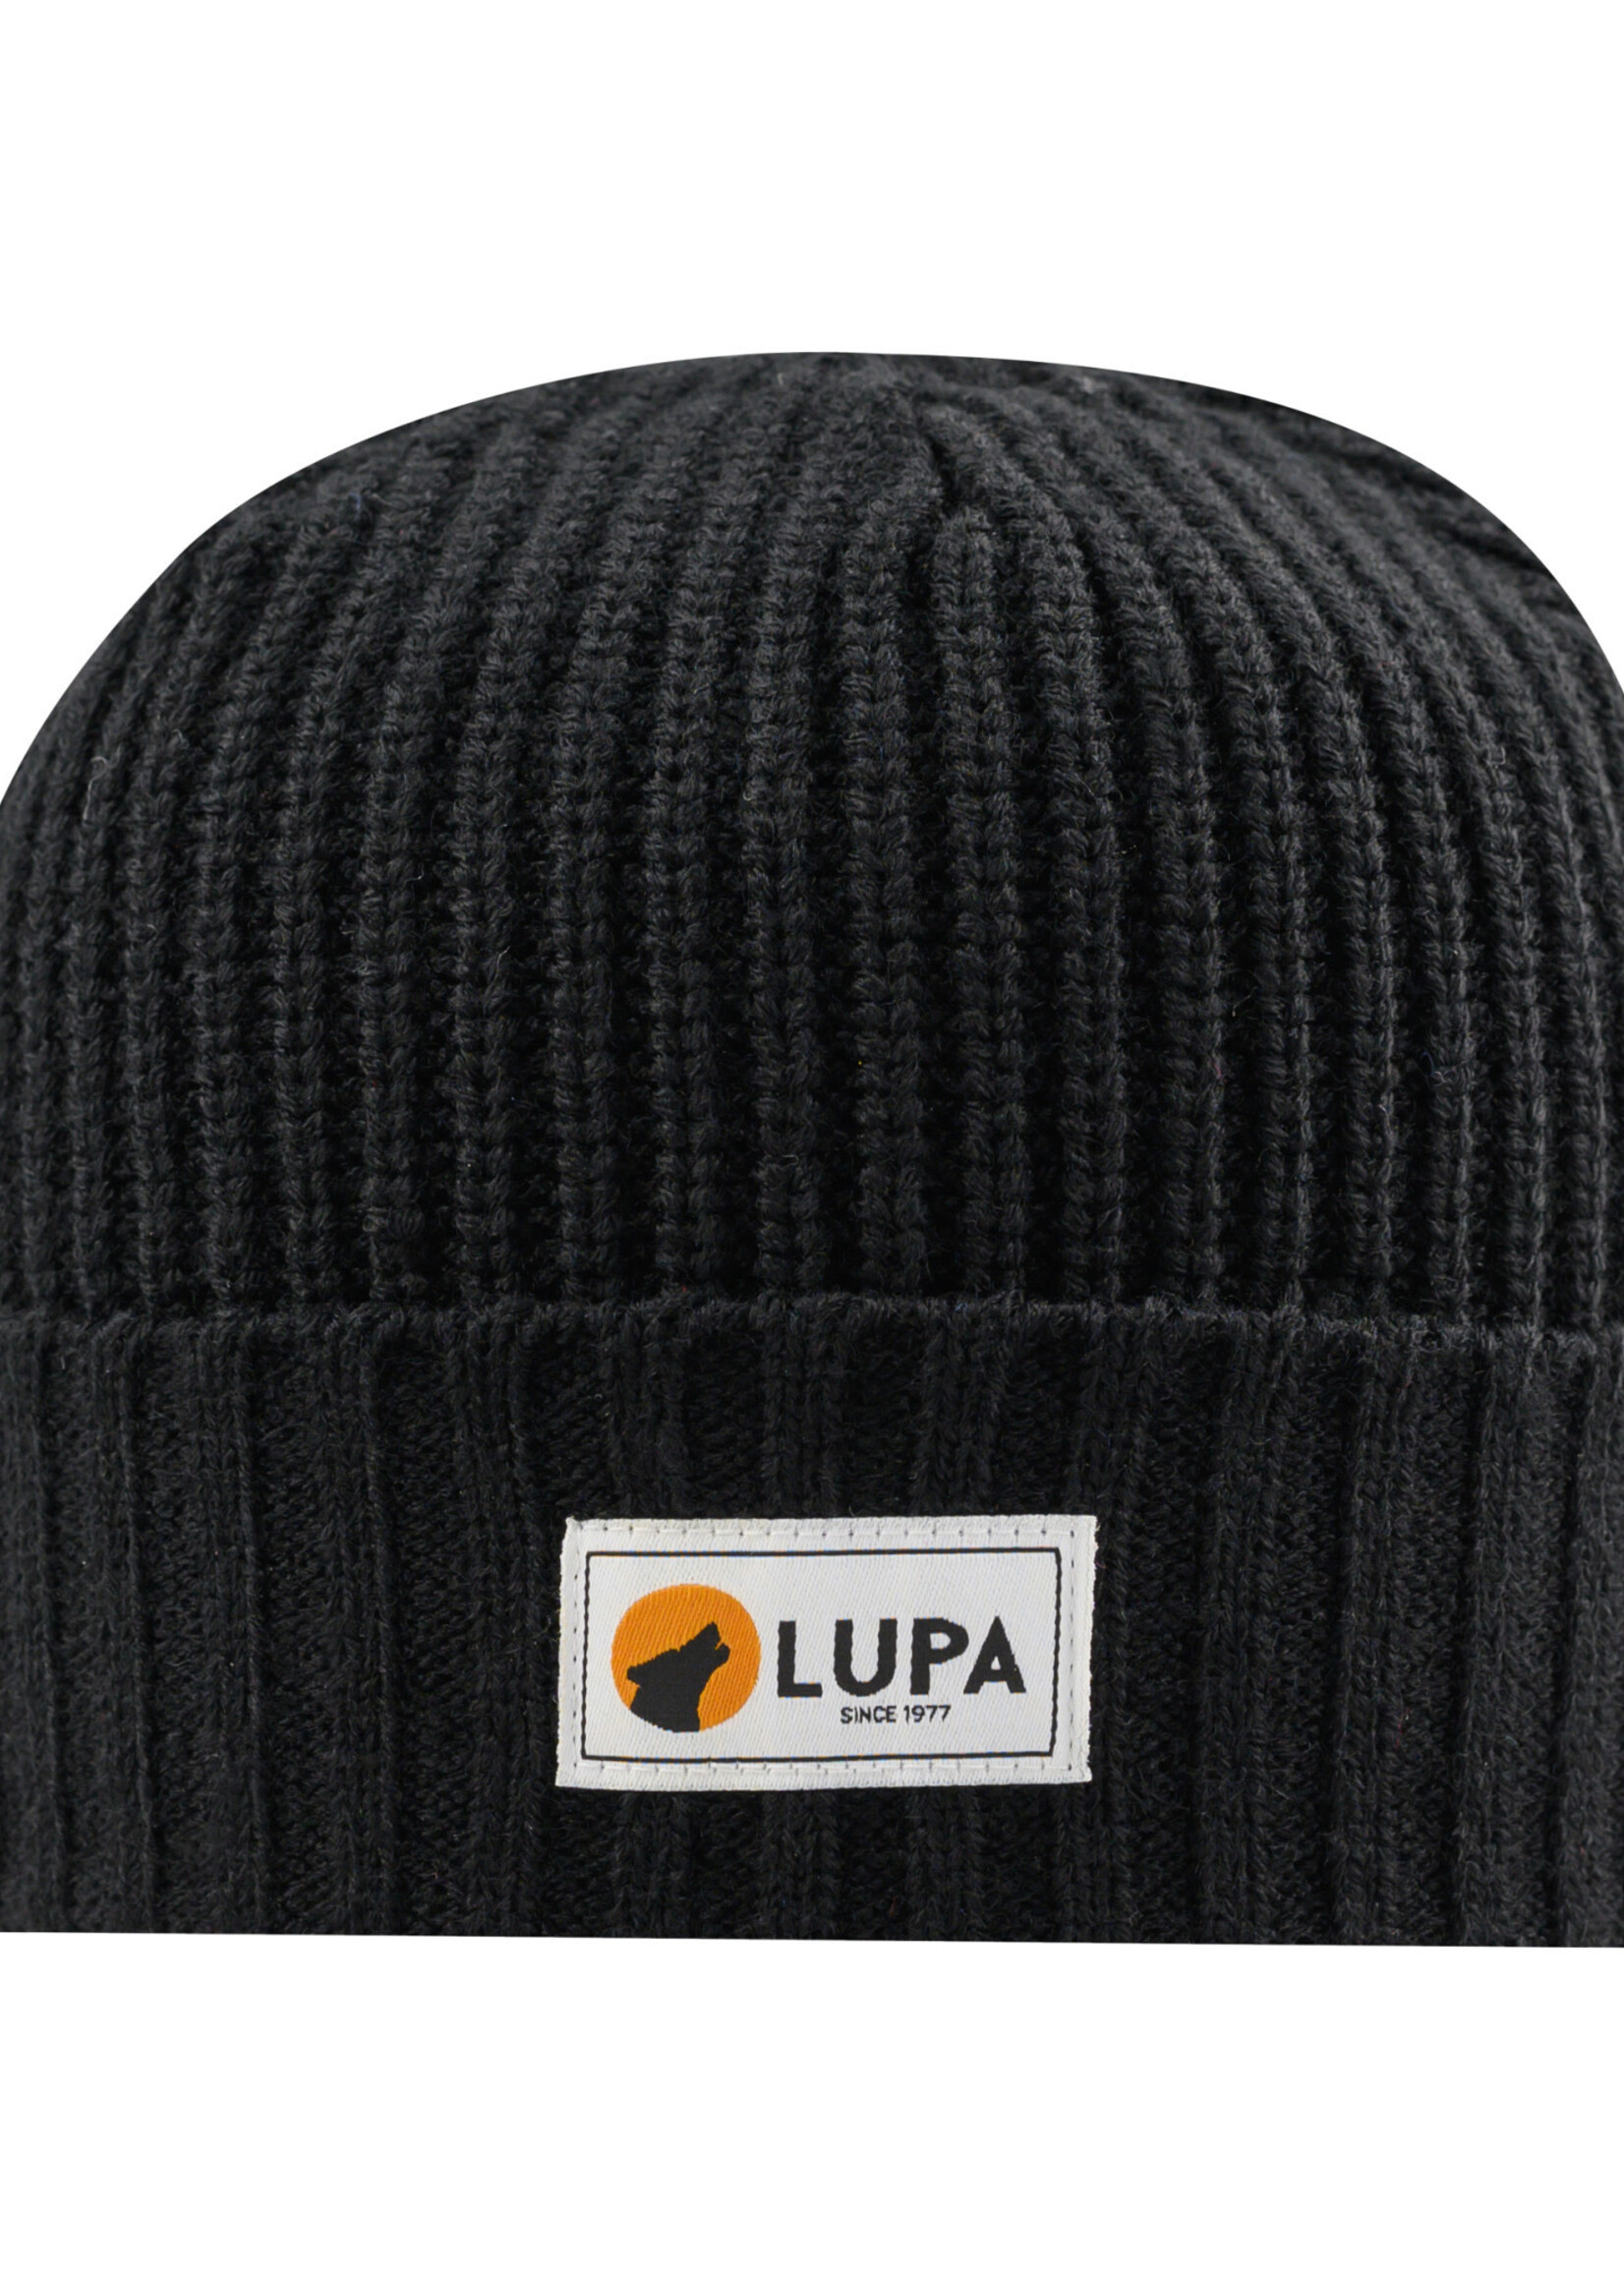 Lupa Tuque Enfant Froid Extreme Black | Canadian-made Kids Extreme Cold Beanie Black